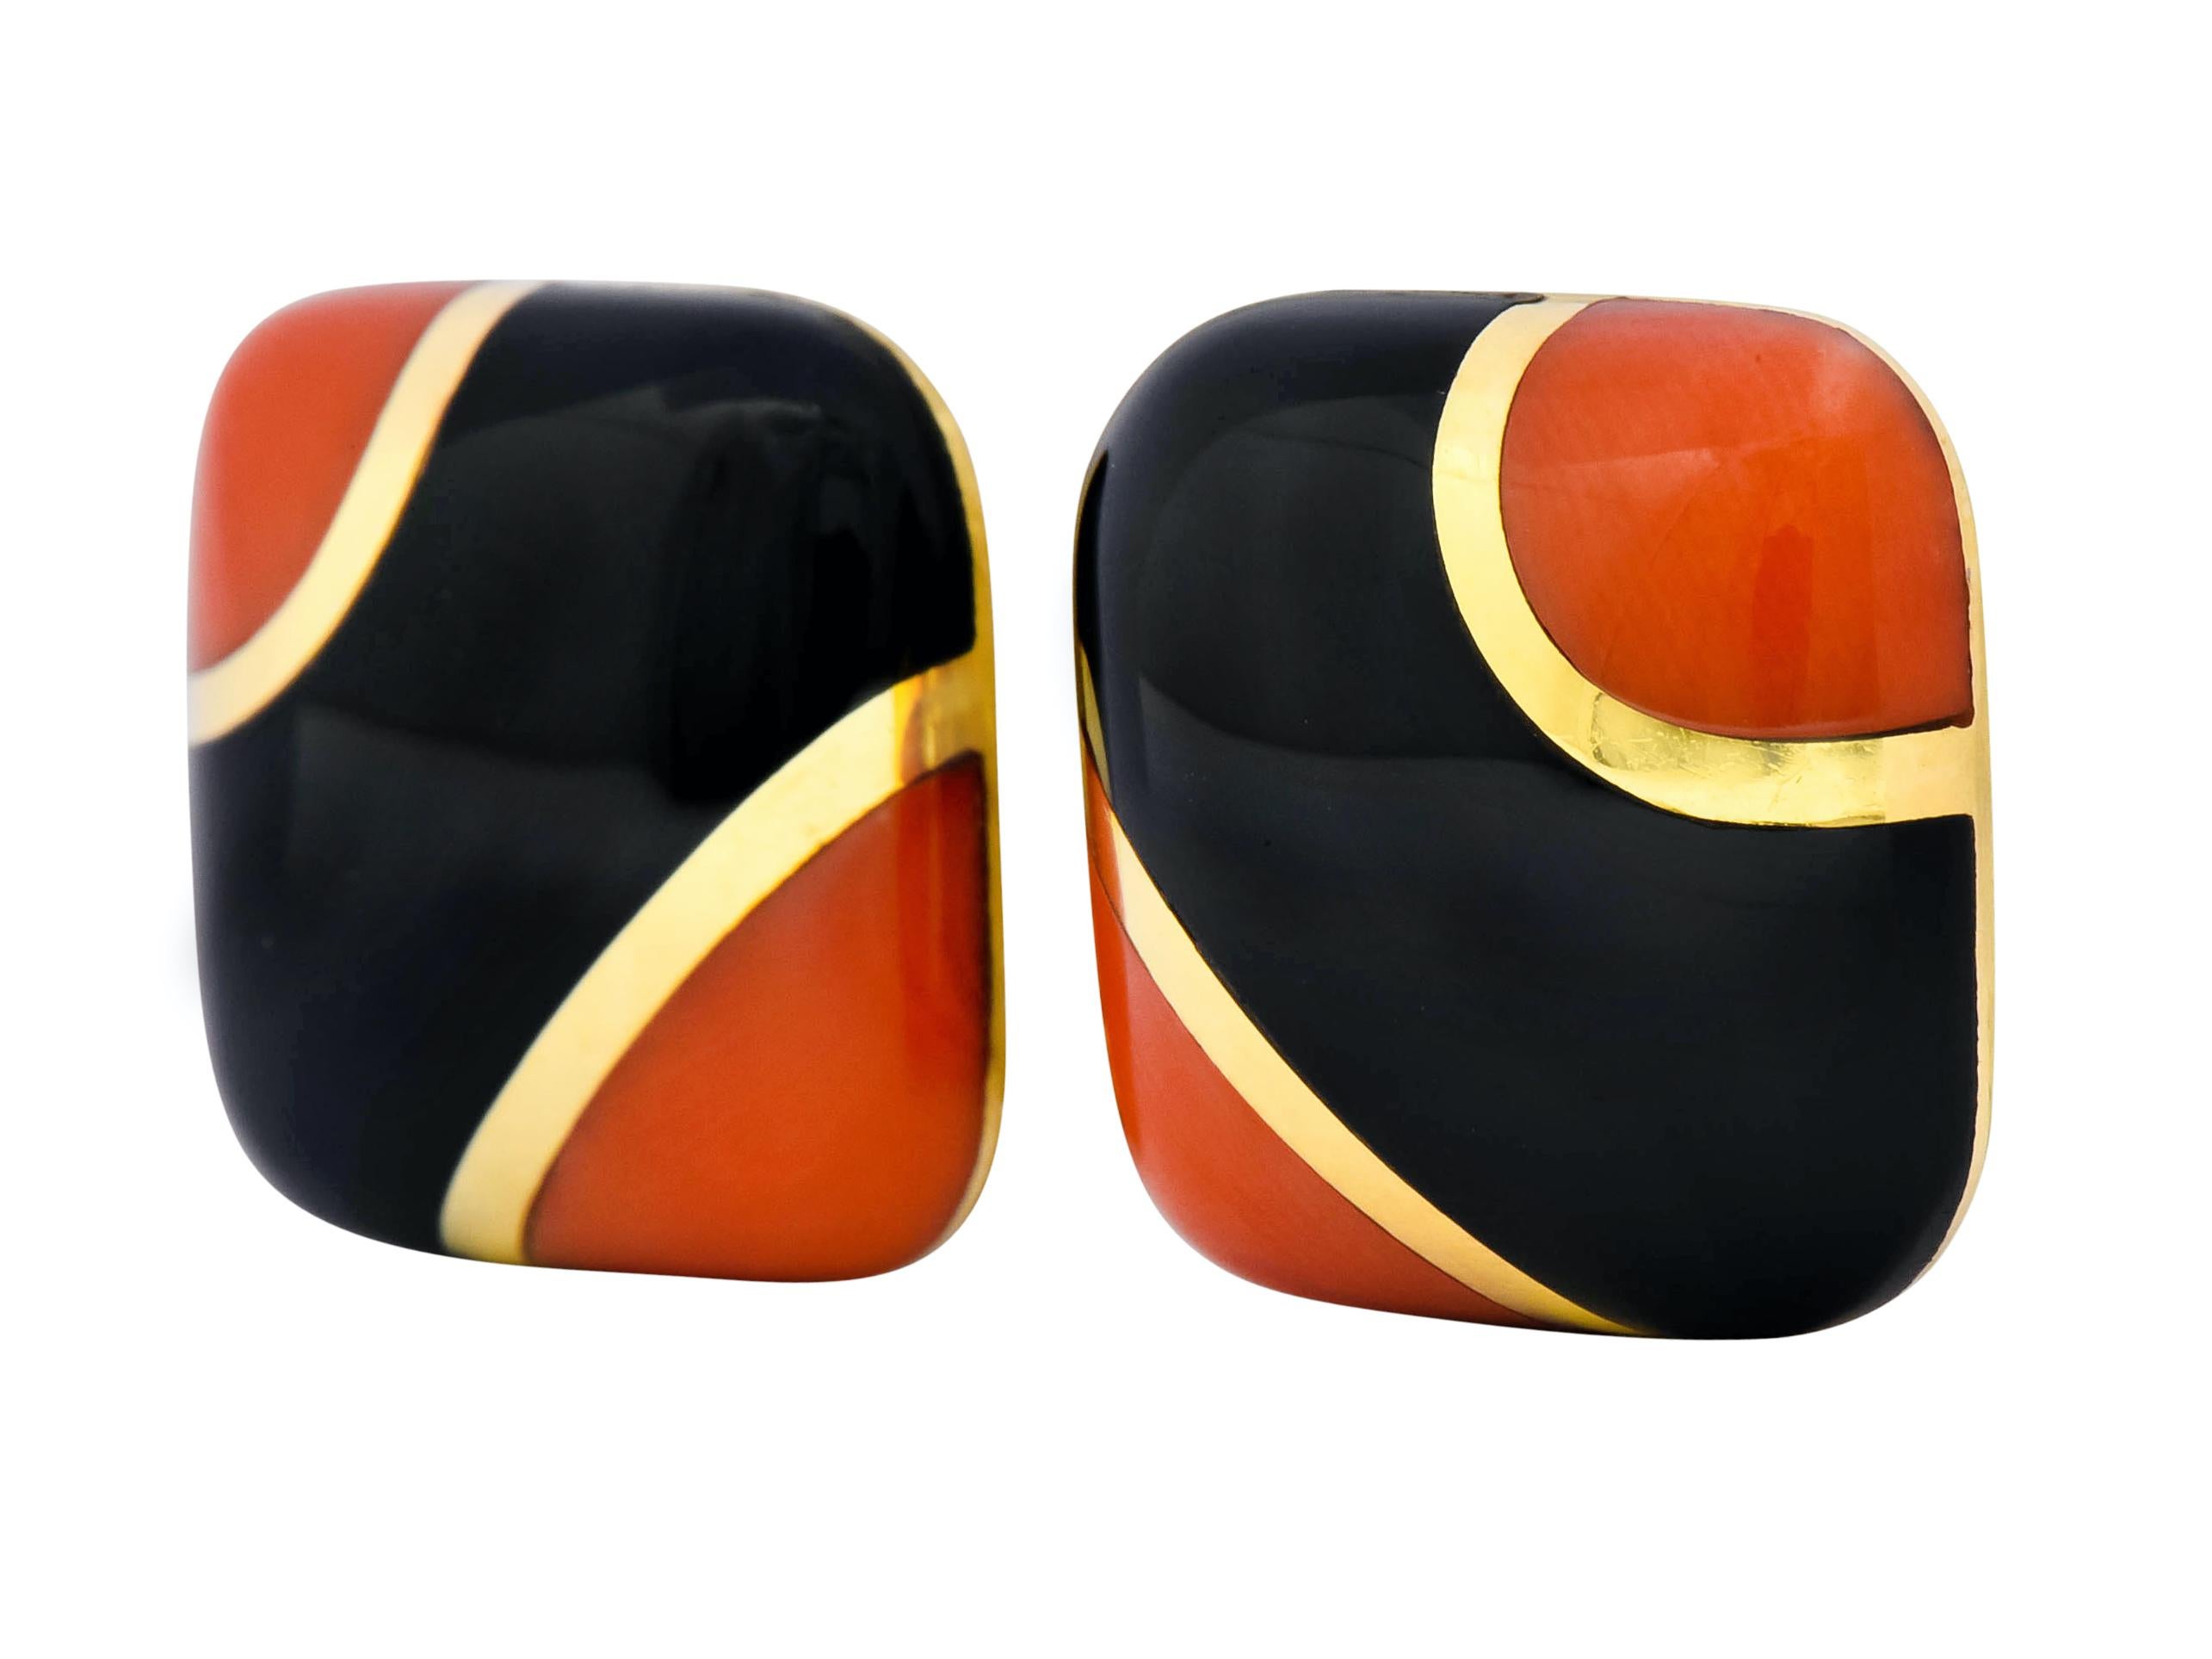 Centering onyx flanked by coral inlaid flush with gold banding

Onyx is opaque and glossy black, coral is robust reddish-orange

Completed by posts and hinged omega backs

With makers mark and stamped 18K for 18 karat gold

Circa: 1960s

Measures: